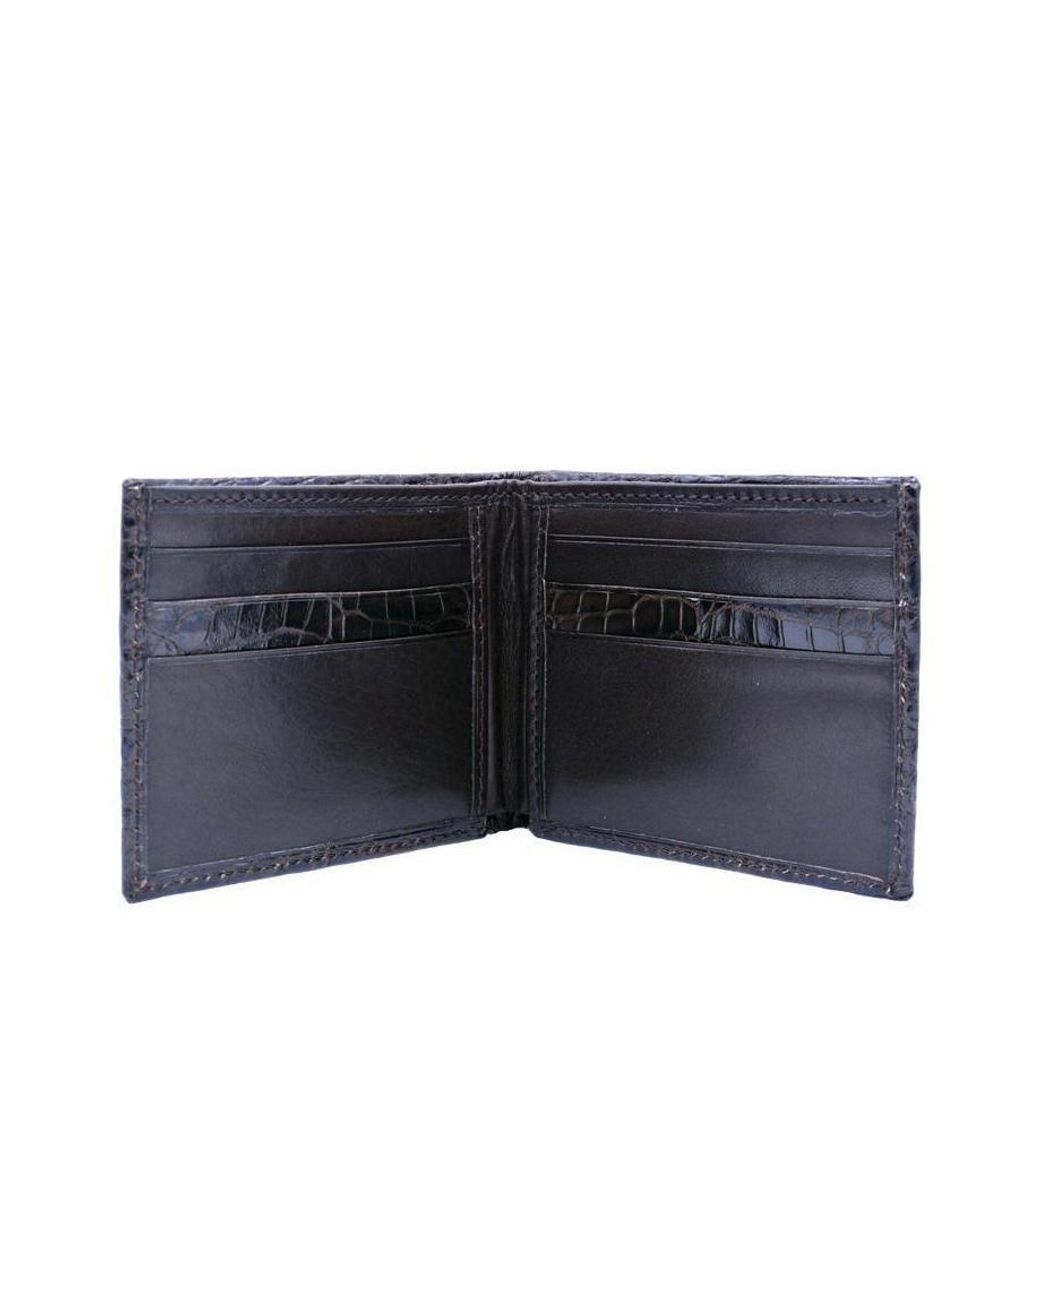 Zelli Wallet Nicotine Exotic Crocodile 81-540 Mens Accessories Wallets and cardholders zelw1001 in Brown for Men 